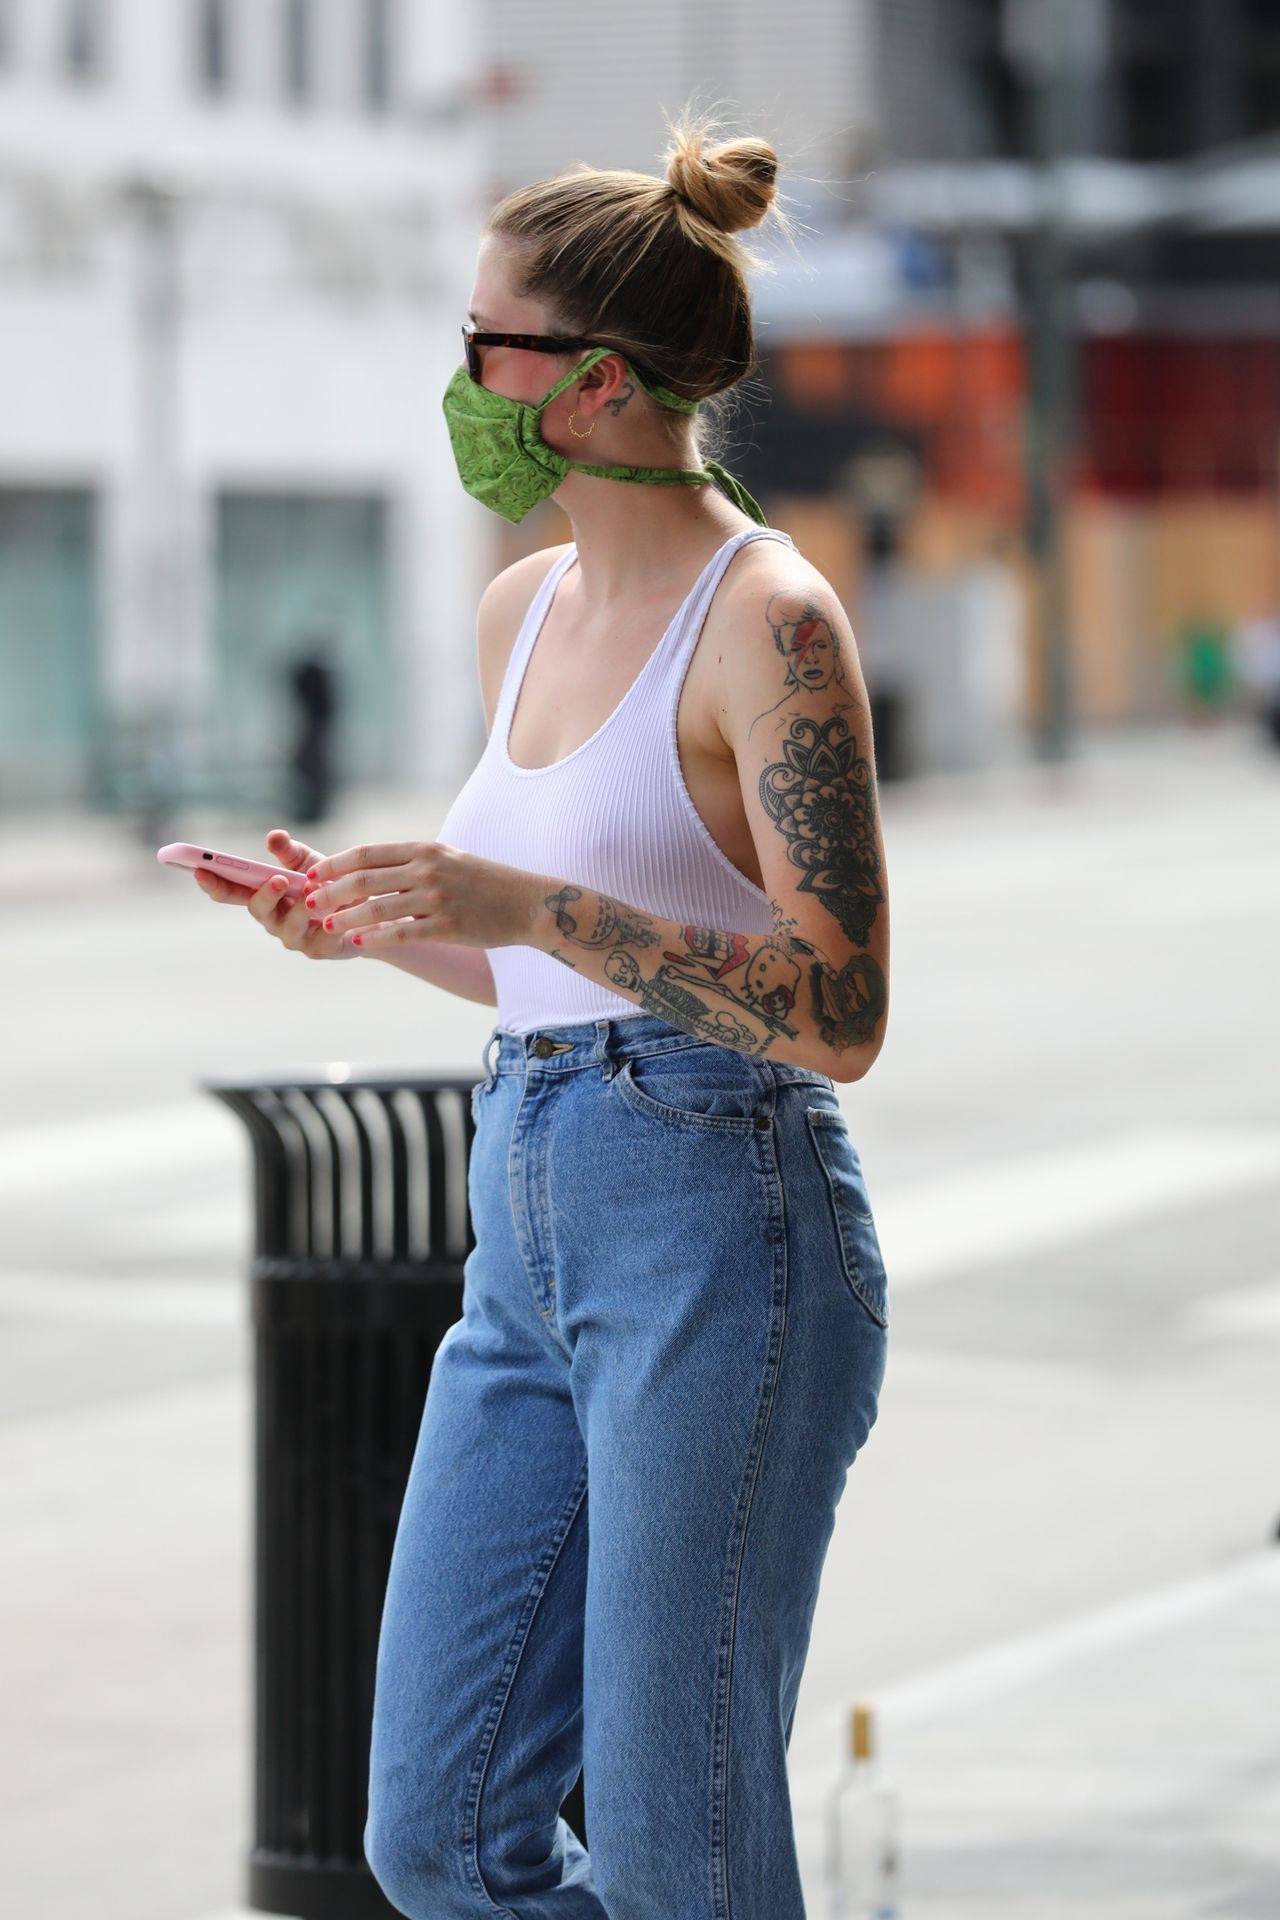 Ireland Baldwin – Sexy Braless Boobs In White Top Out In Hollywood 0022